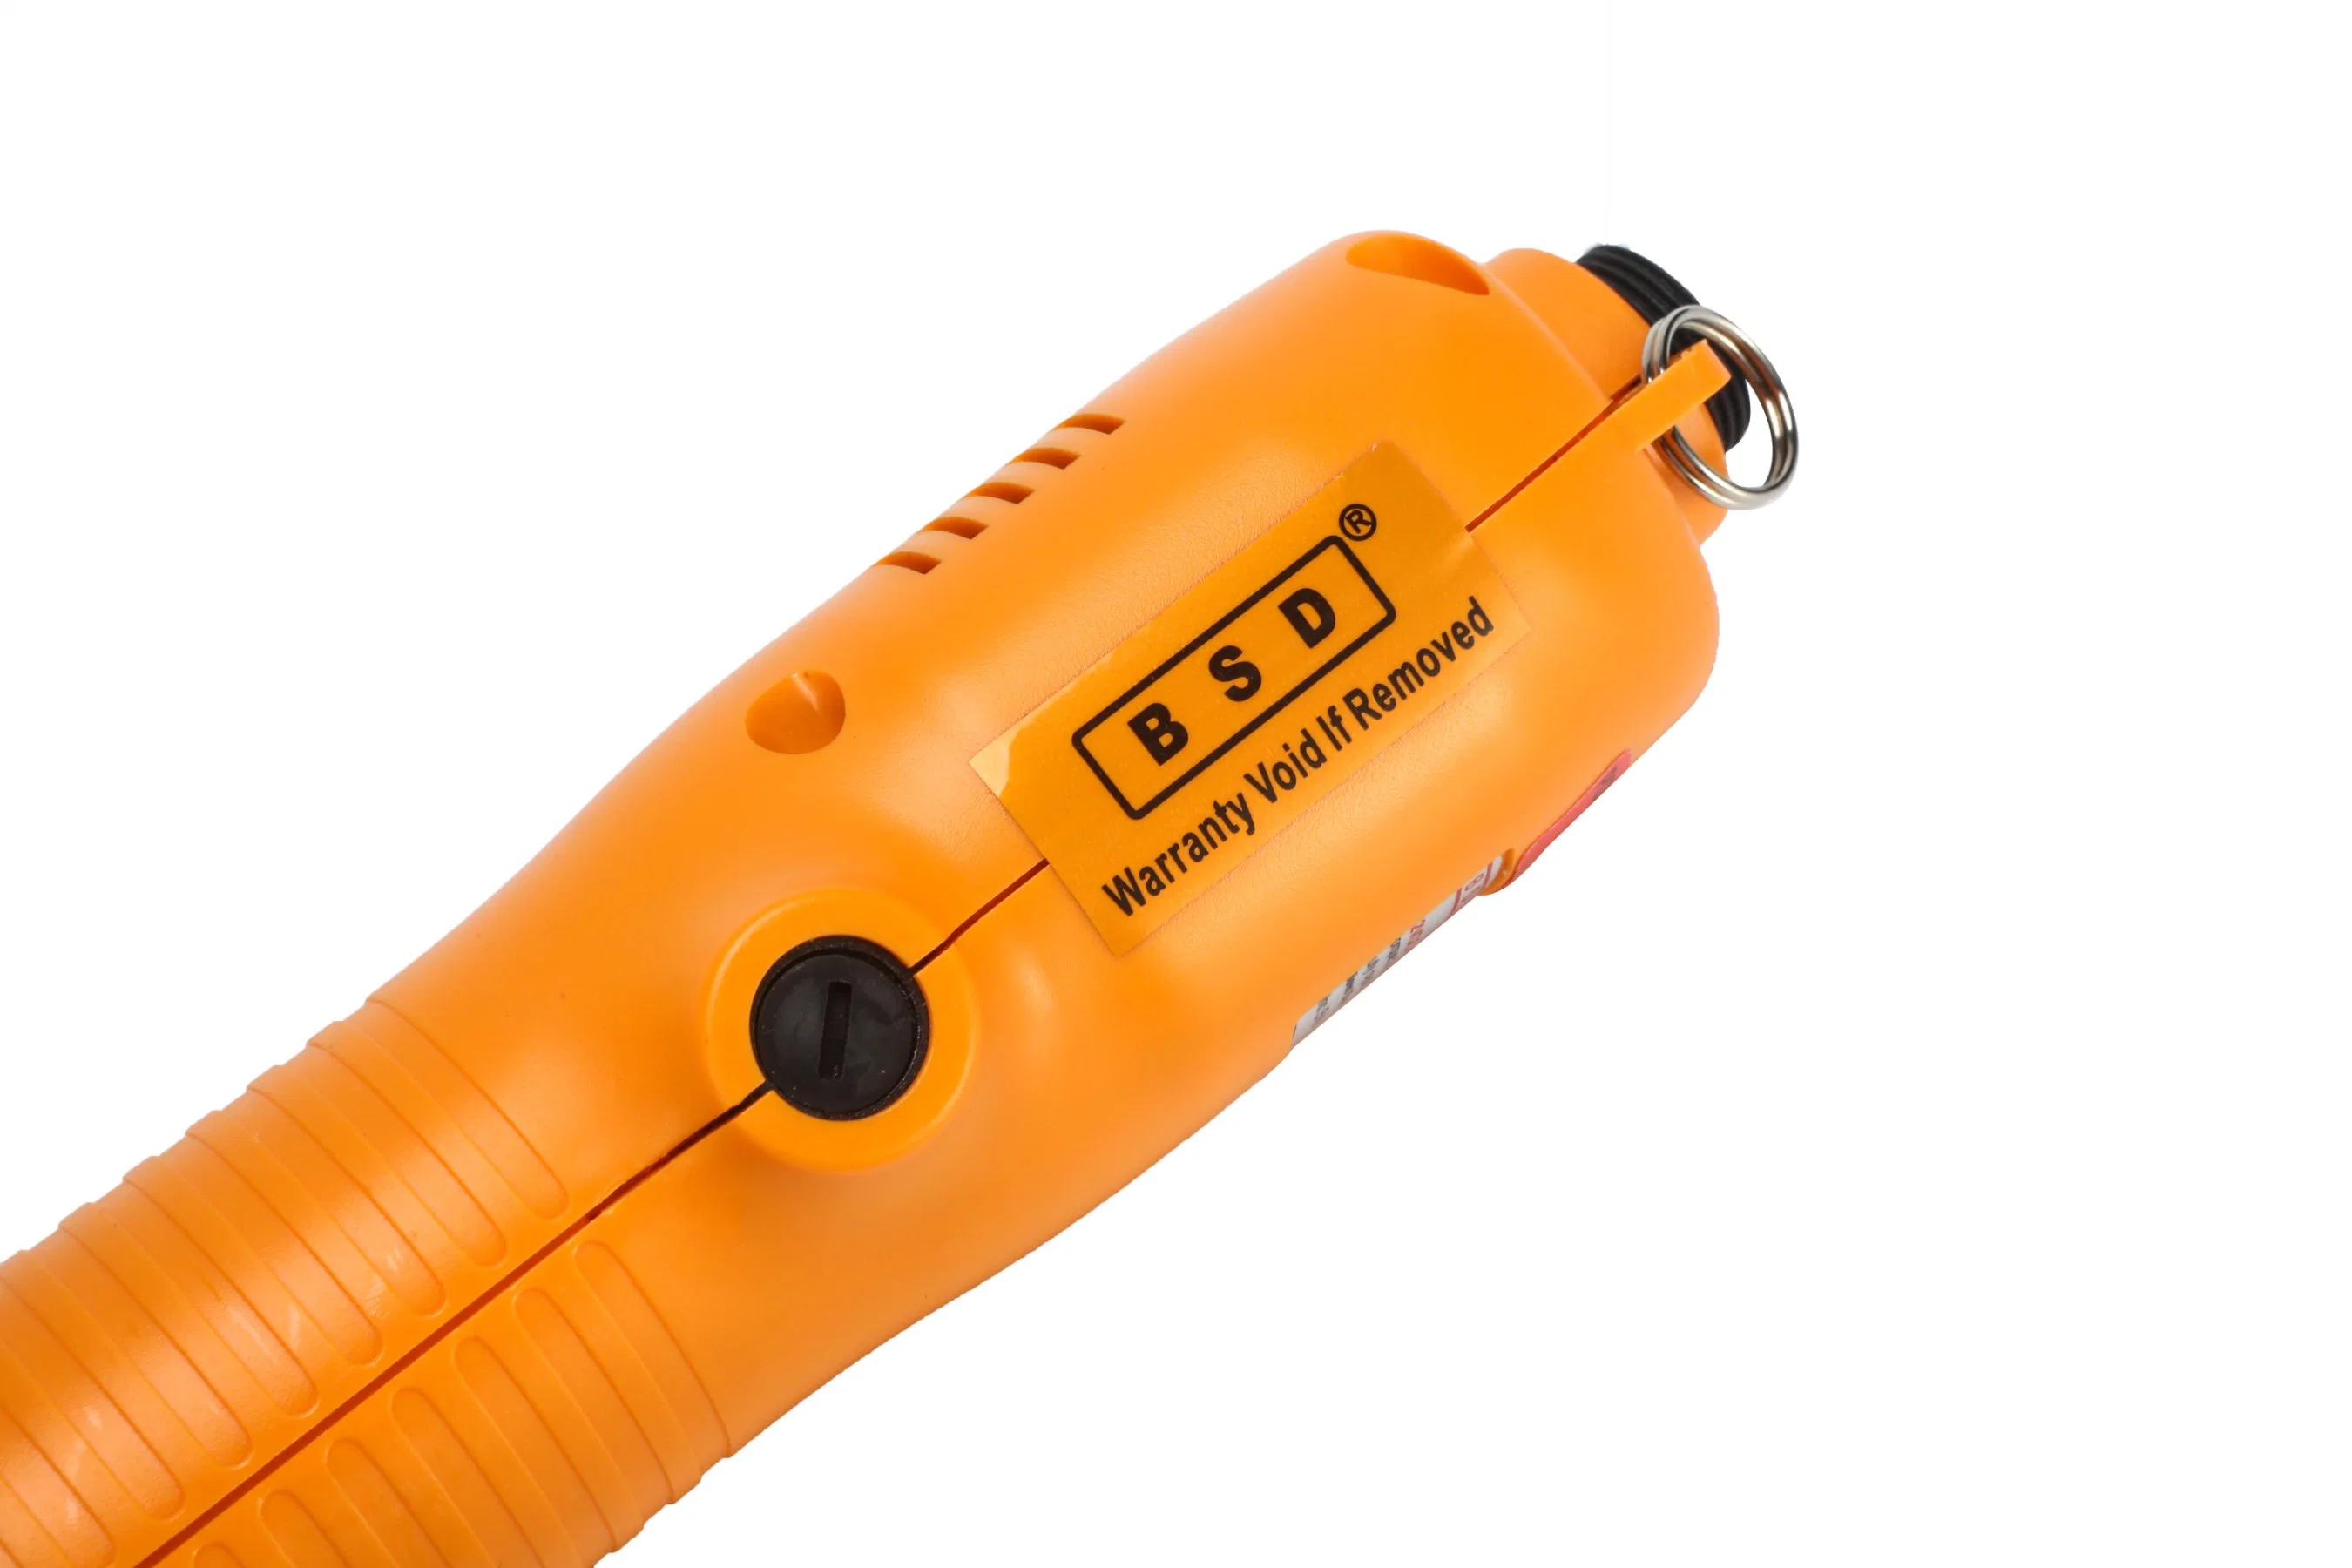 Bsd-6200p Kilews Torque Precision Fully Automatic Electric Screwdriver for Production Line, Production Tools, Shut off Clutch